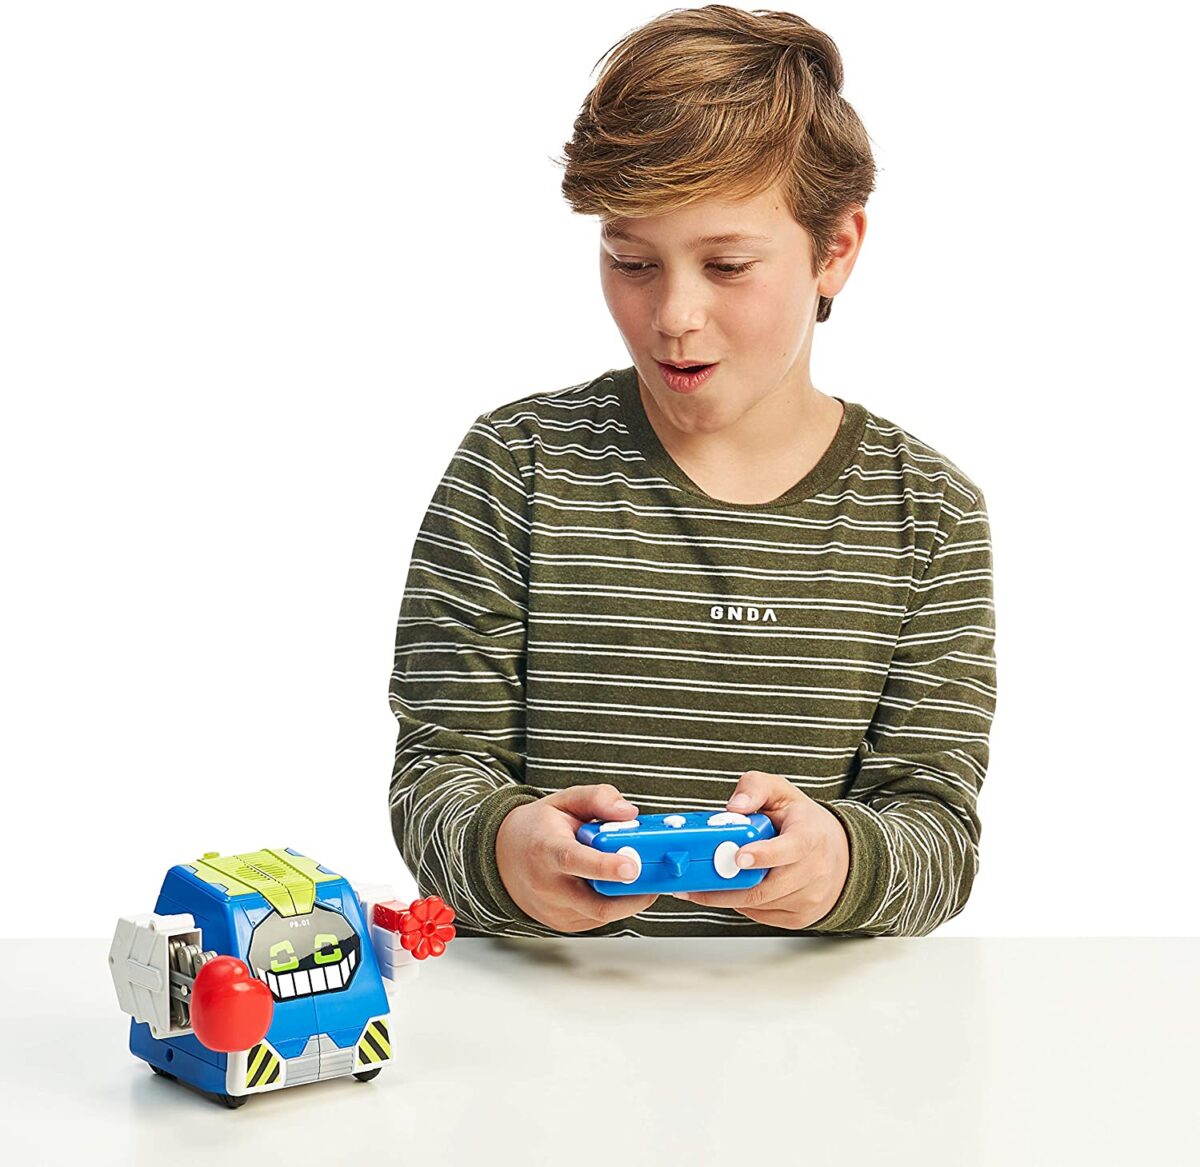 25 Awesome Amazon Toys For Kids To Kickstart Your Holiday Shopping